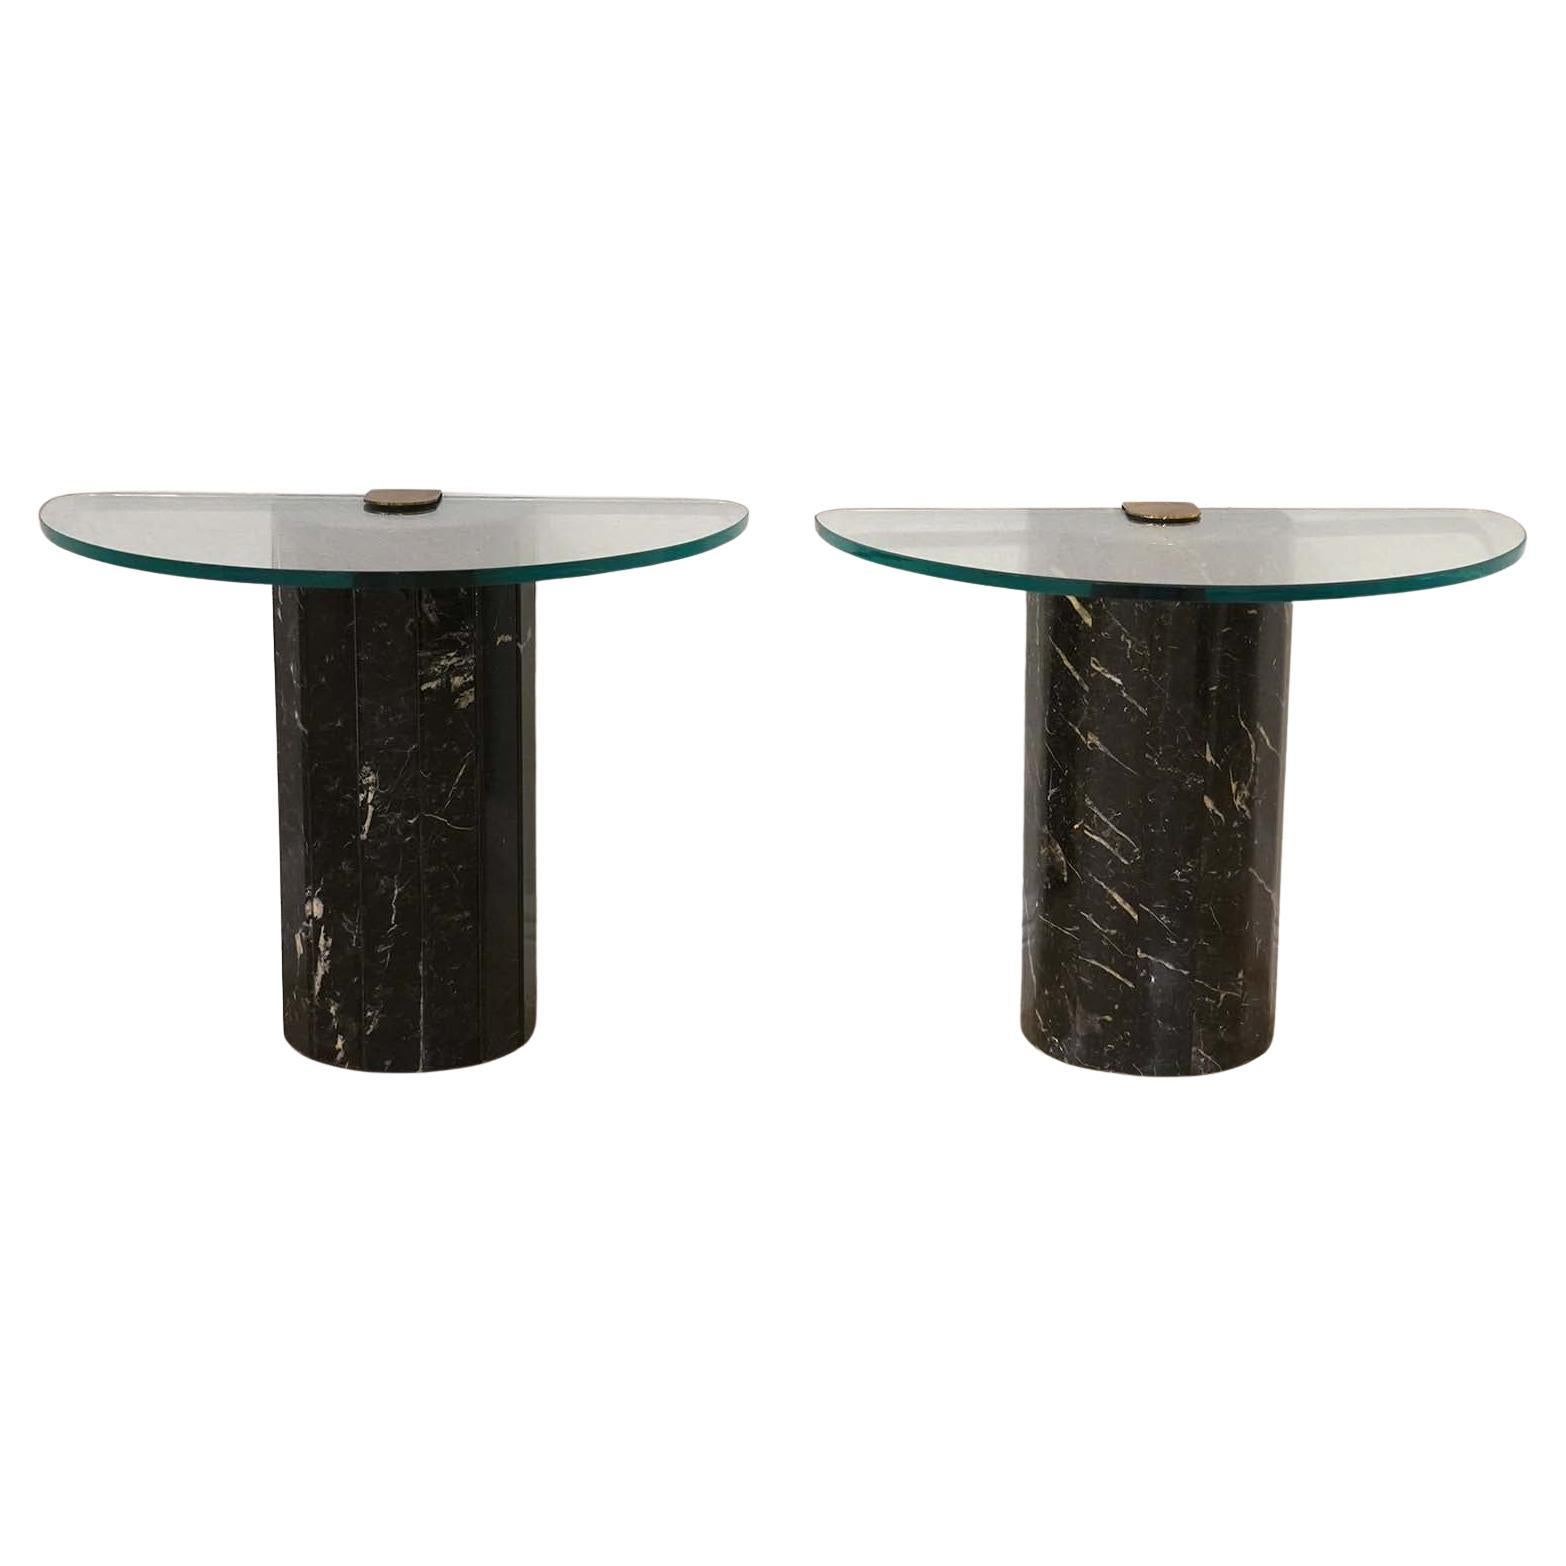 Pair of Italian Marble, Brass and Glass Tables Signed La Rosa